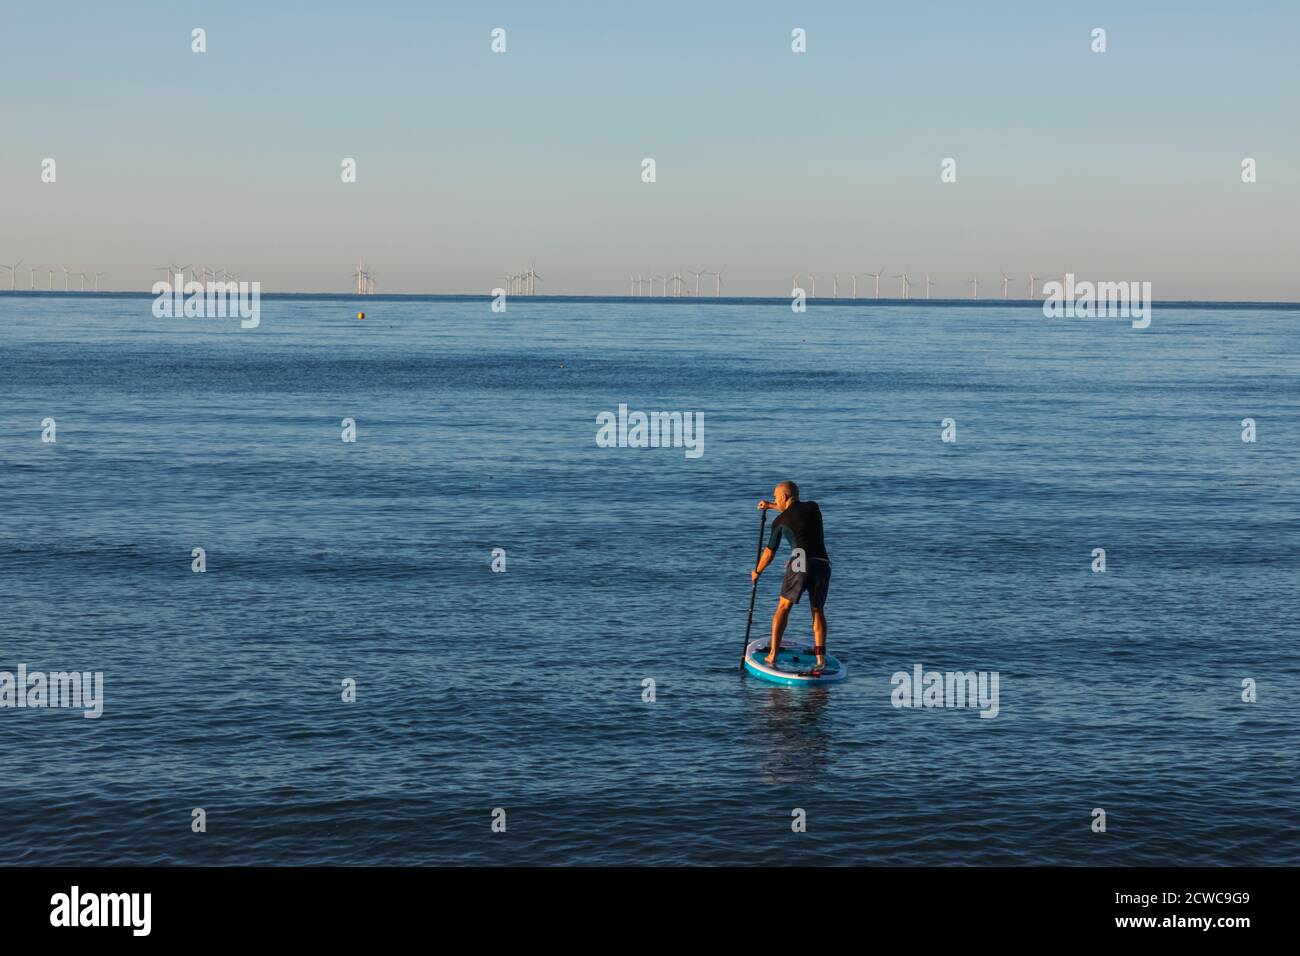 Angleterre, West Sussex, Worthing, Worthing Beach, Paddle Boarder on Calm Sea Banque D'Images